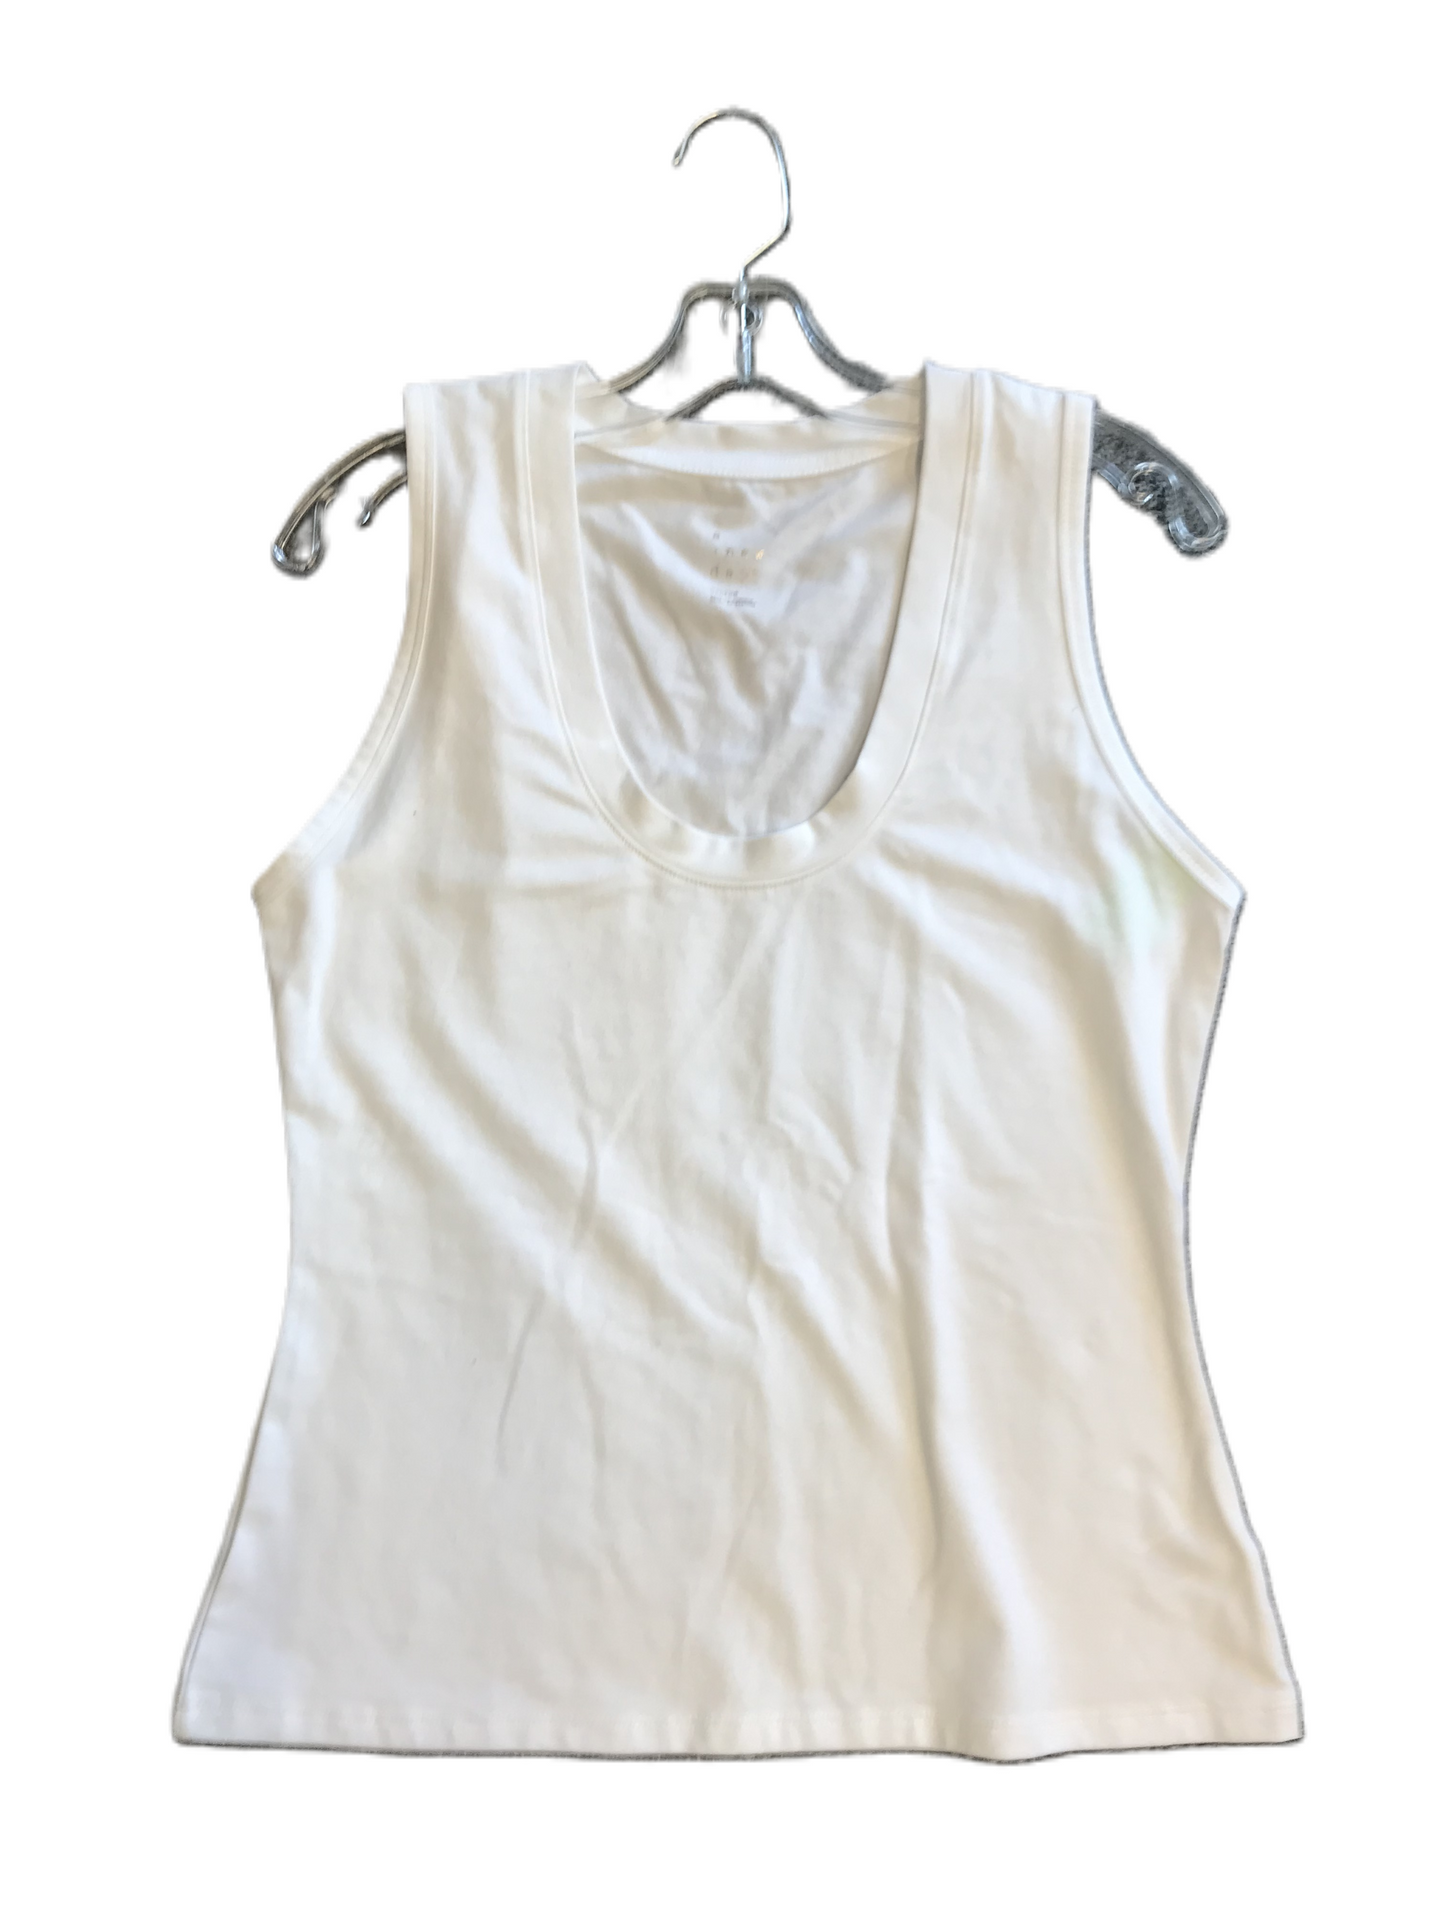 Top Sleeveless Basic By A New Day  Size: L